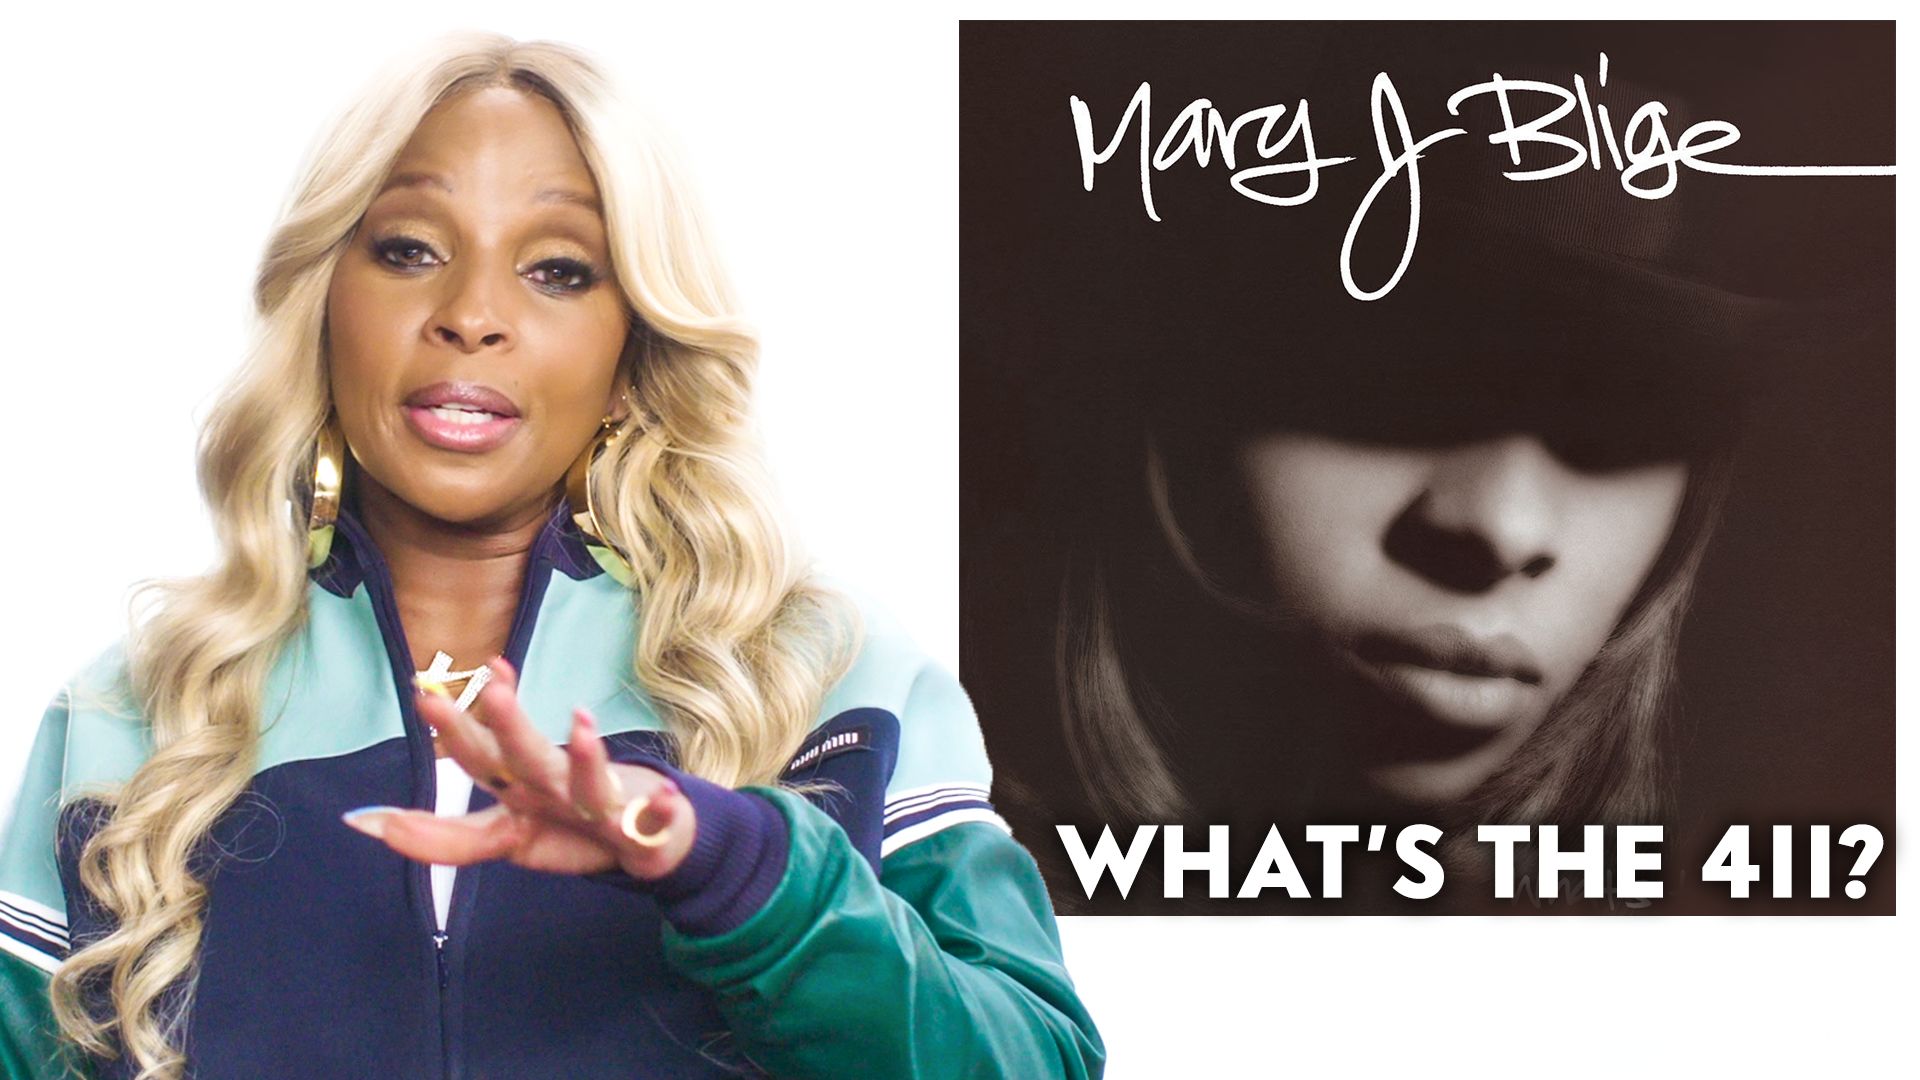 Mary J. Blige - What happens next will change everything.